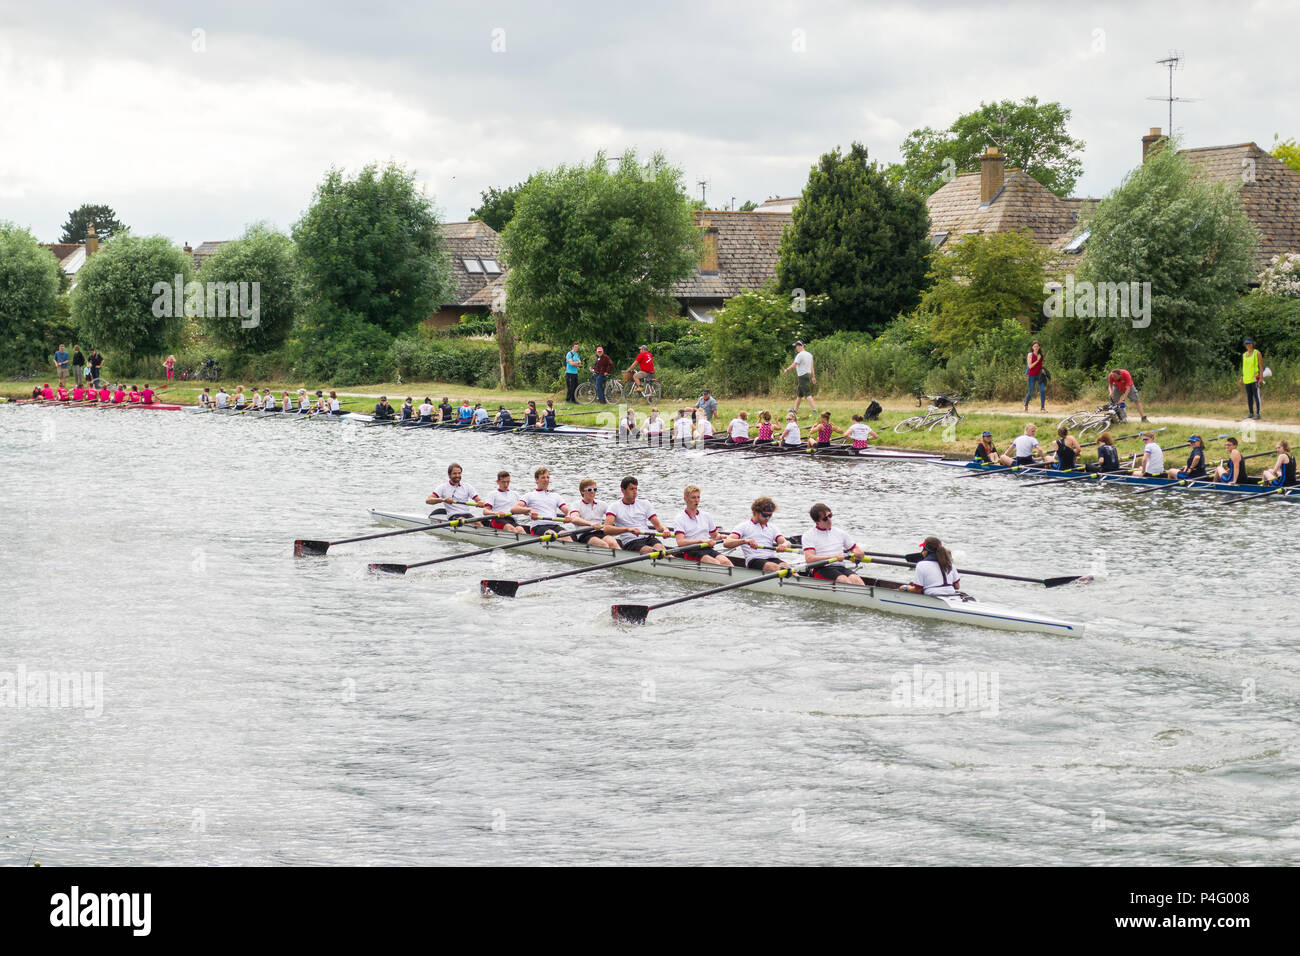 Mens boat crew on the river Cam taking part in The Bumps row boat regatta in Summer, Cambridge, UK Stock Photo